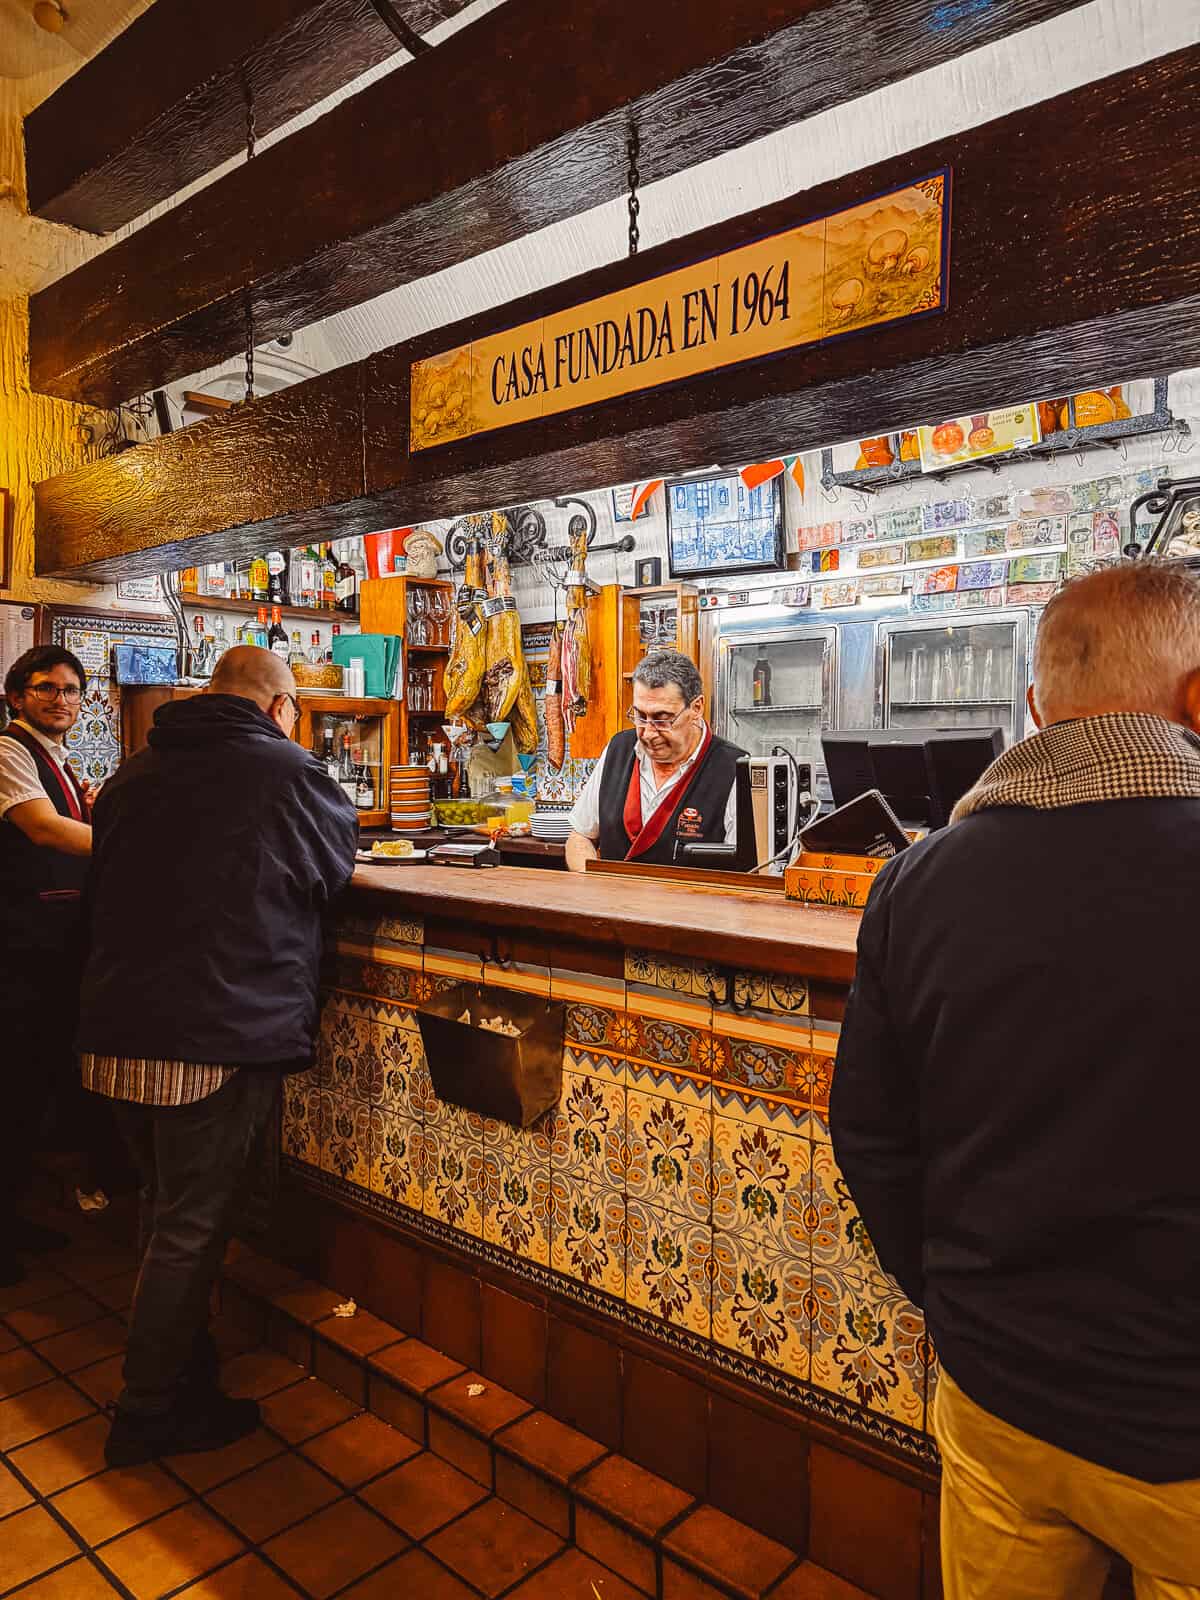 Inside a cozy Spanish mesón, patrons engage with a bartender beneath a wooden sign dating the establishment to 1964, surrounded by ornate tilework and various hanging meats and tapas.